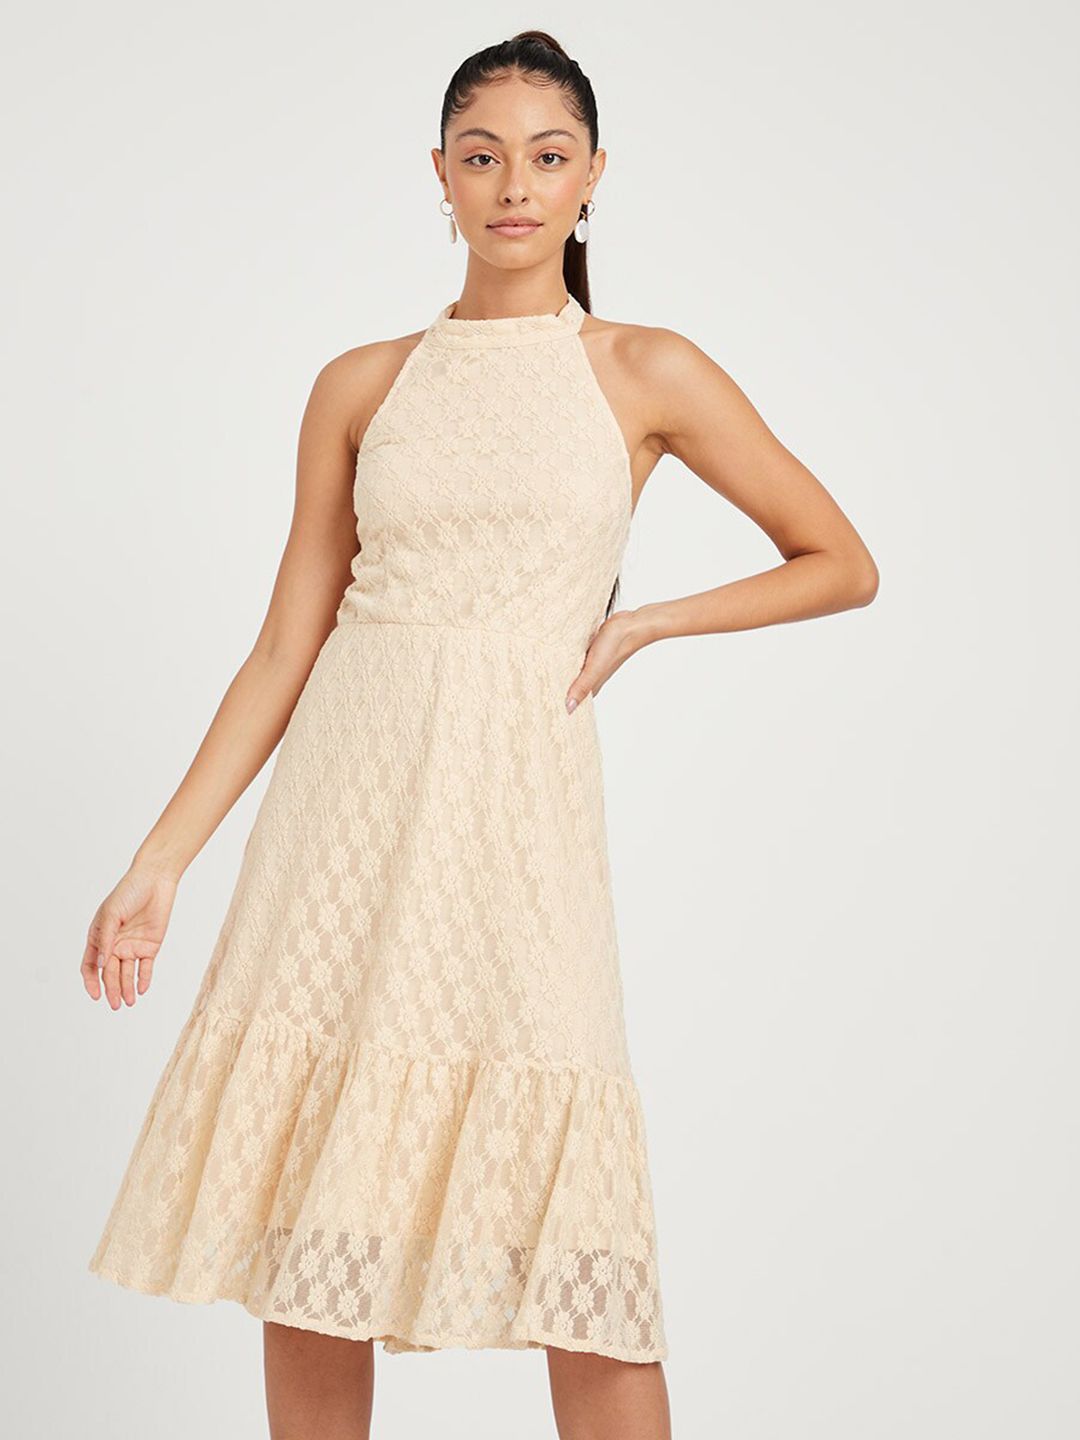 Styli Off White Dress Price in India